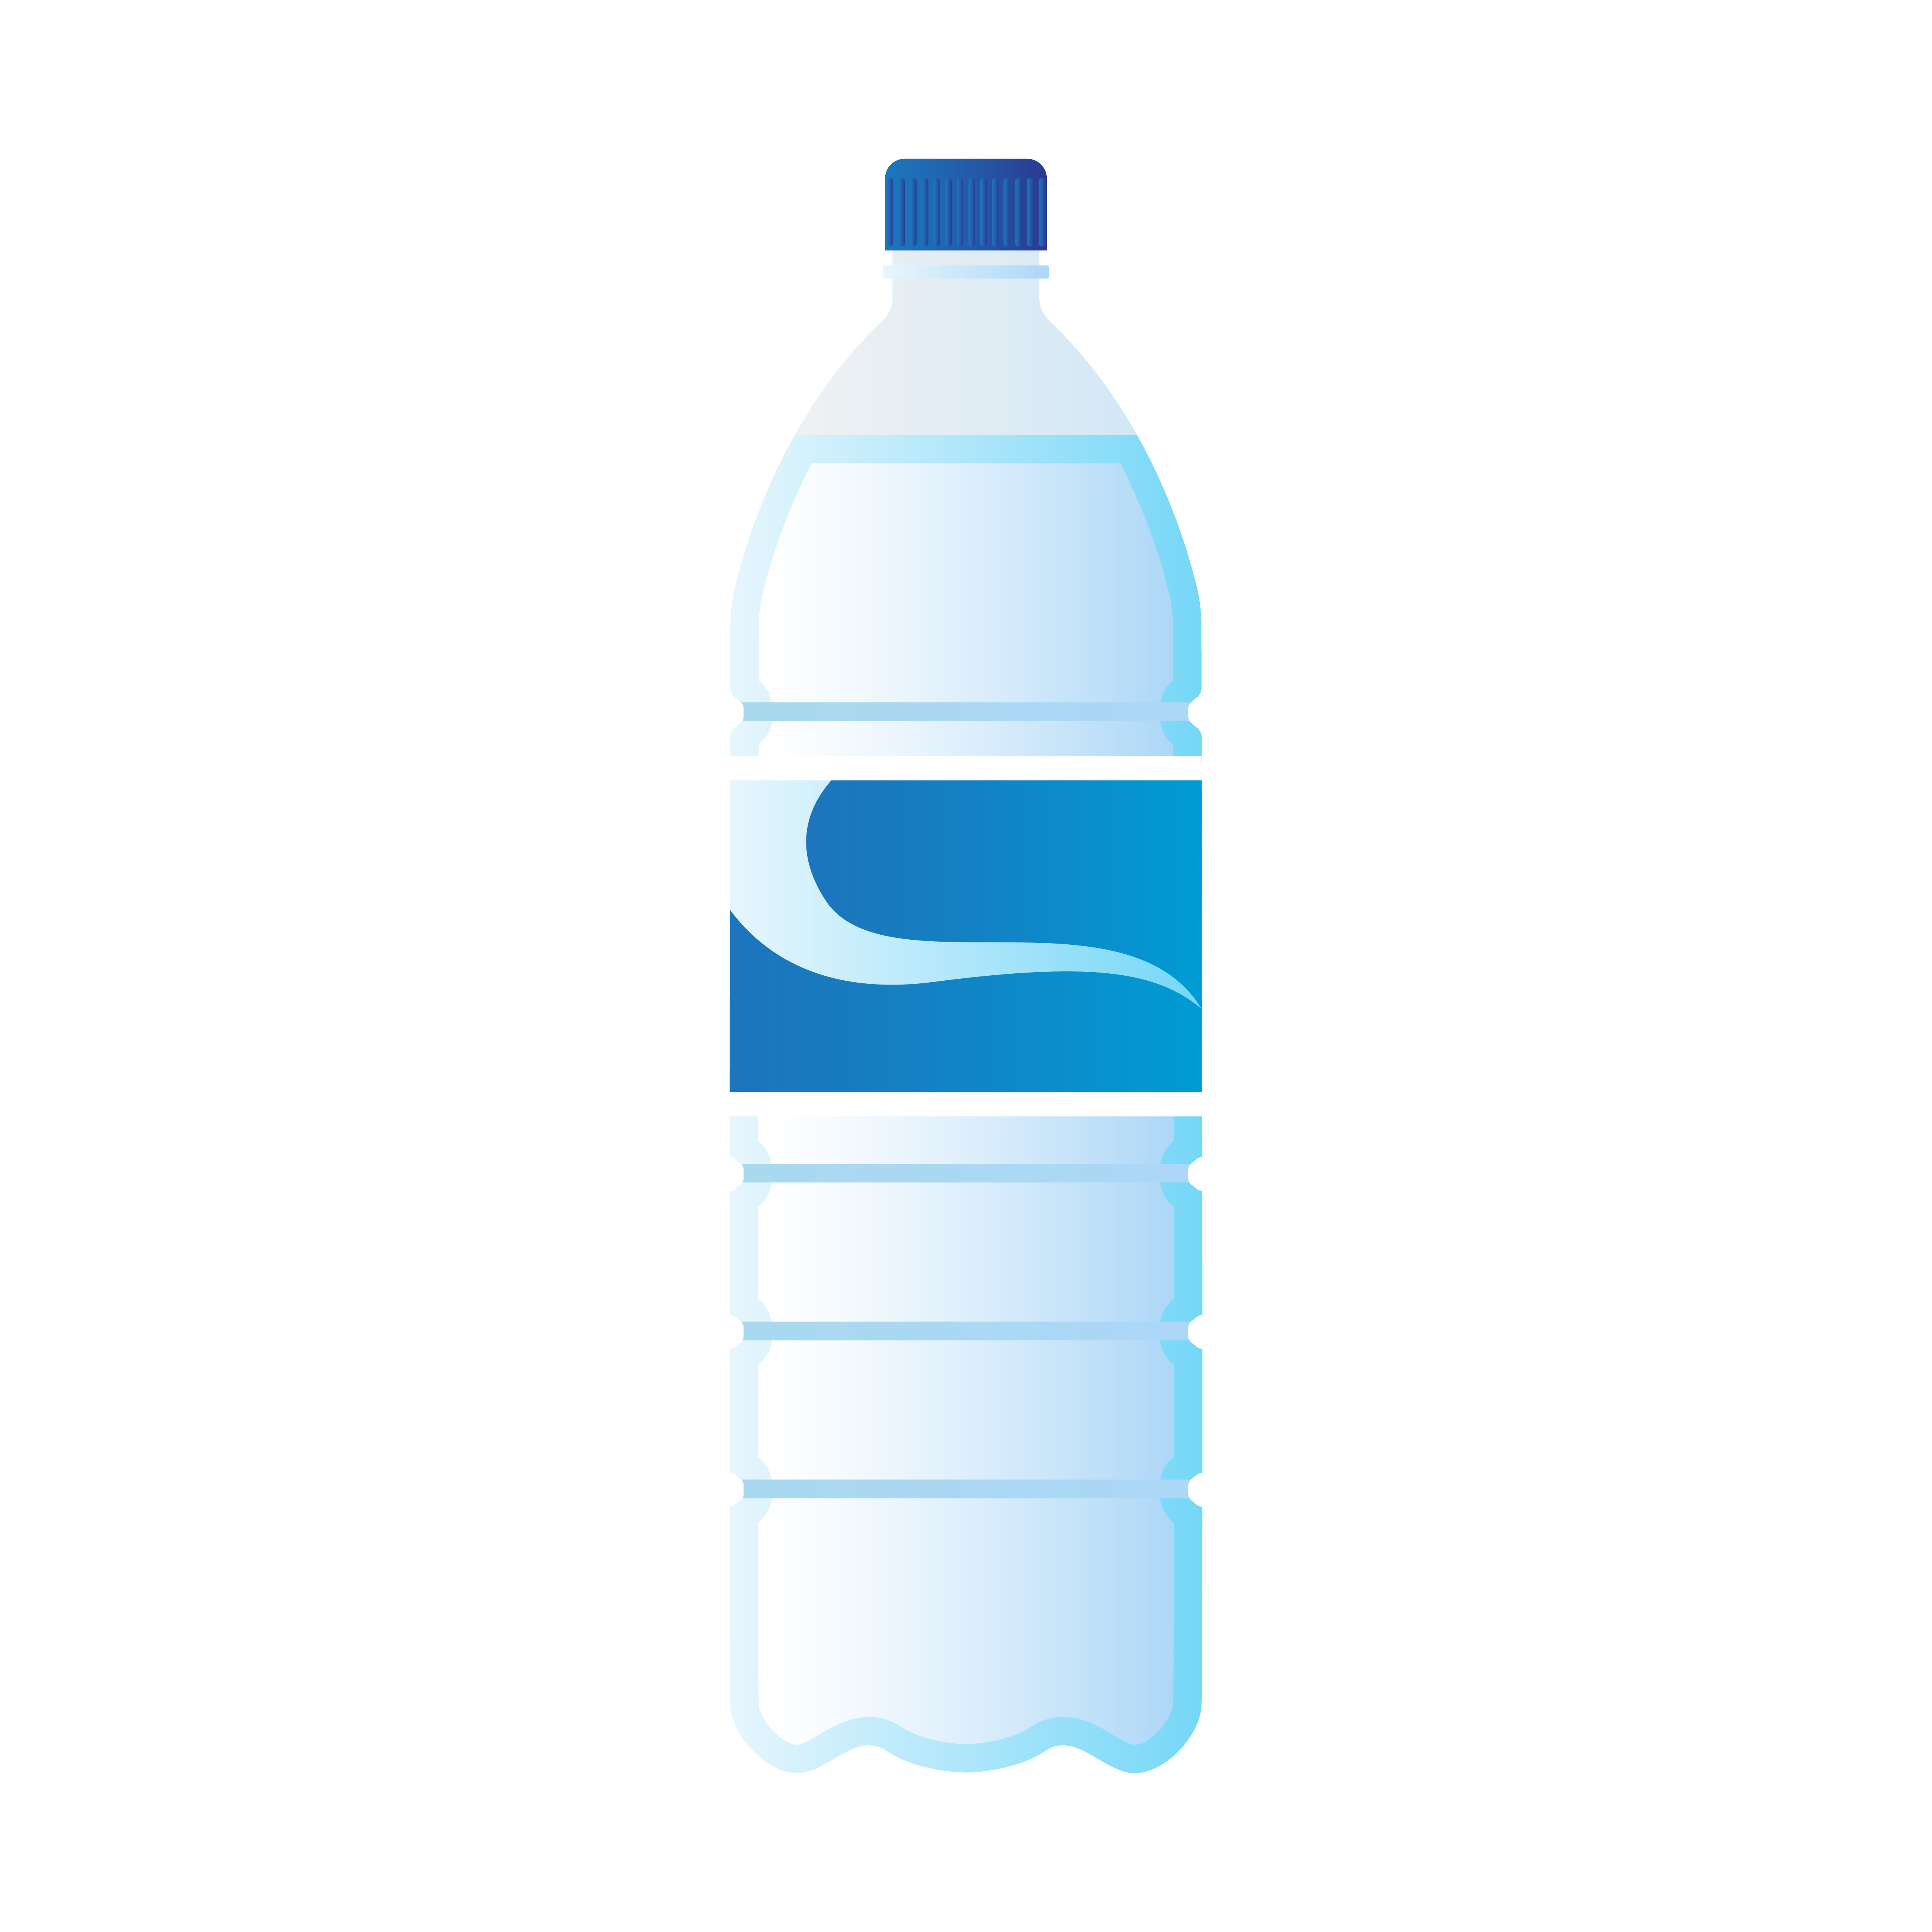 Download Water Bottle Isolated Free Vector Art - (595 Free Downloads)